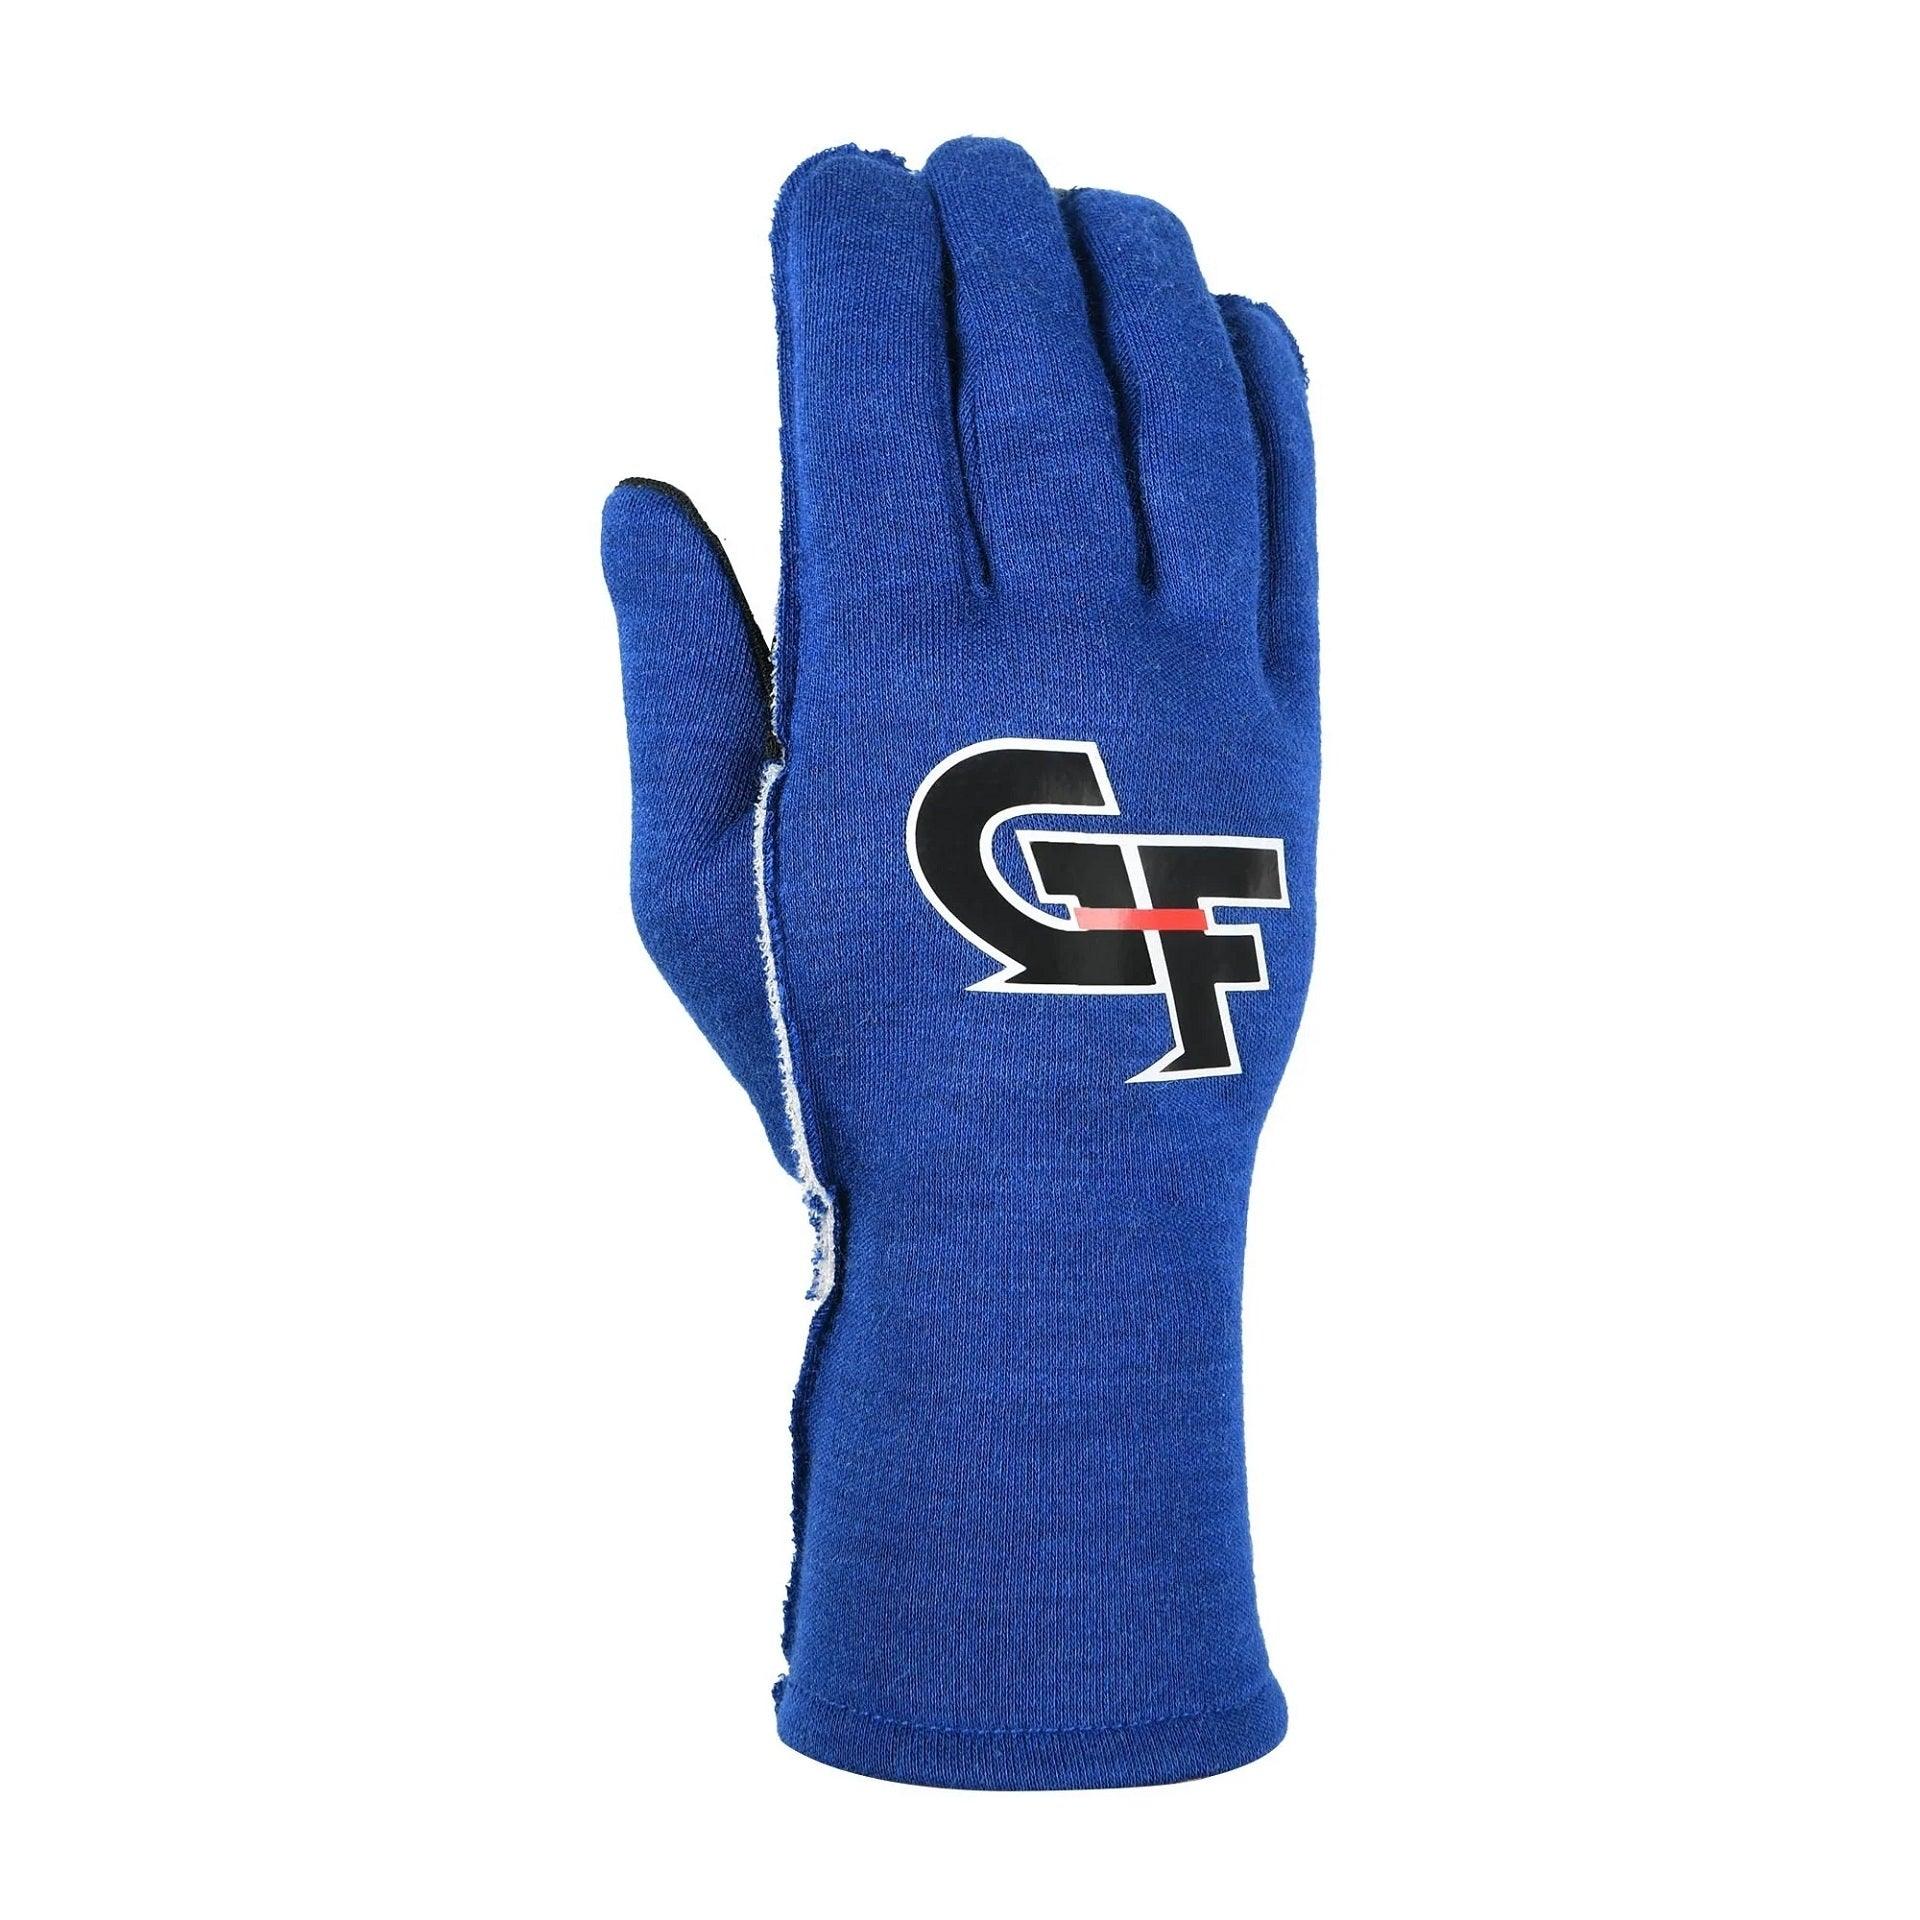 Gloves G-Limit Youth Small Black - Burlile Performance Products